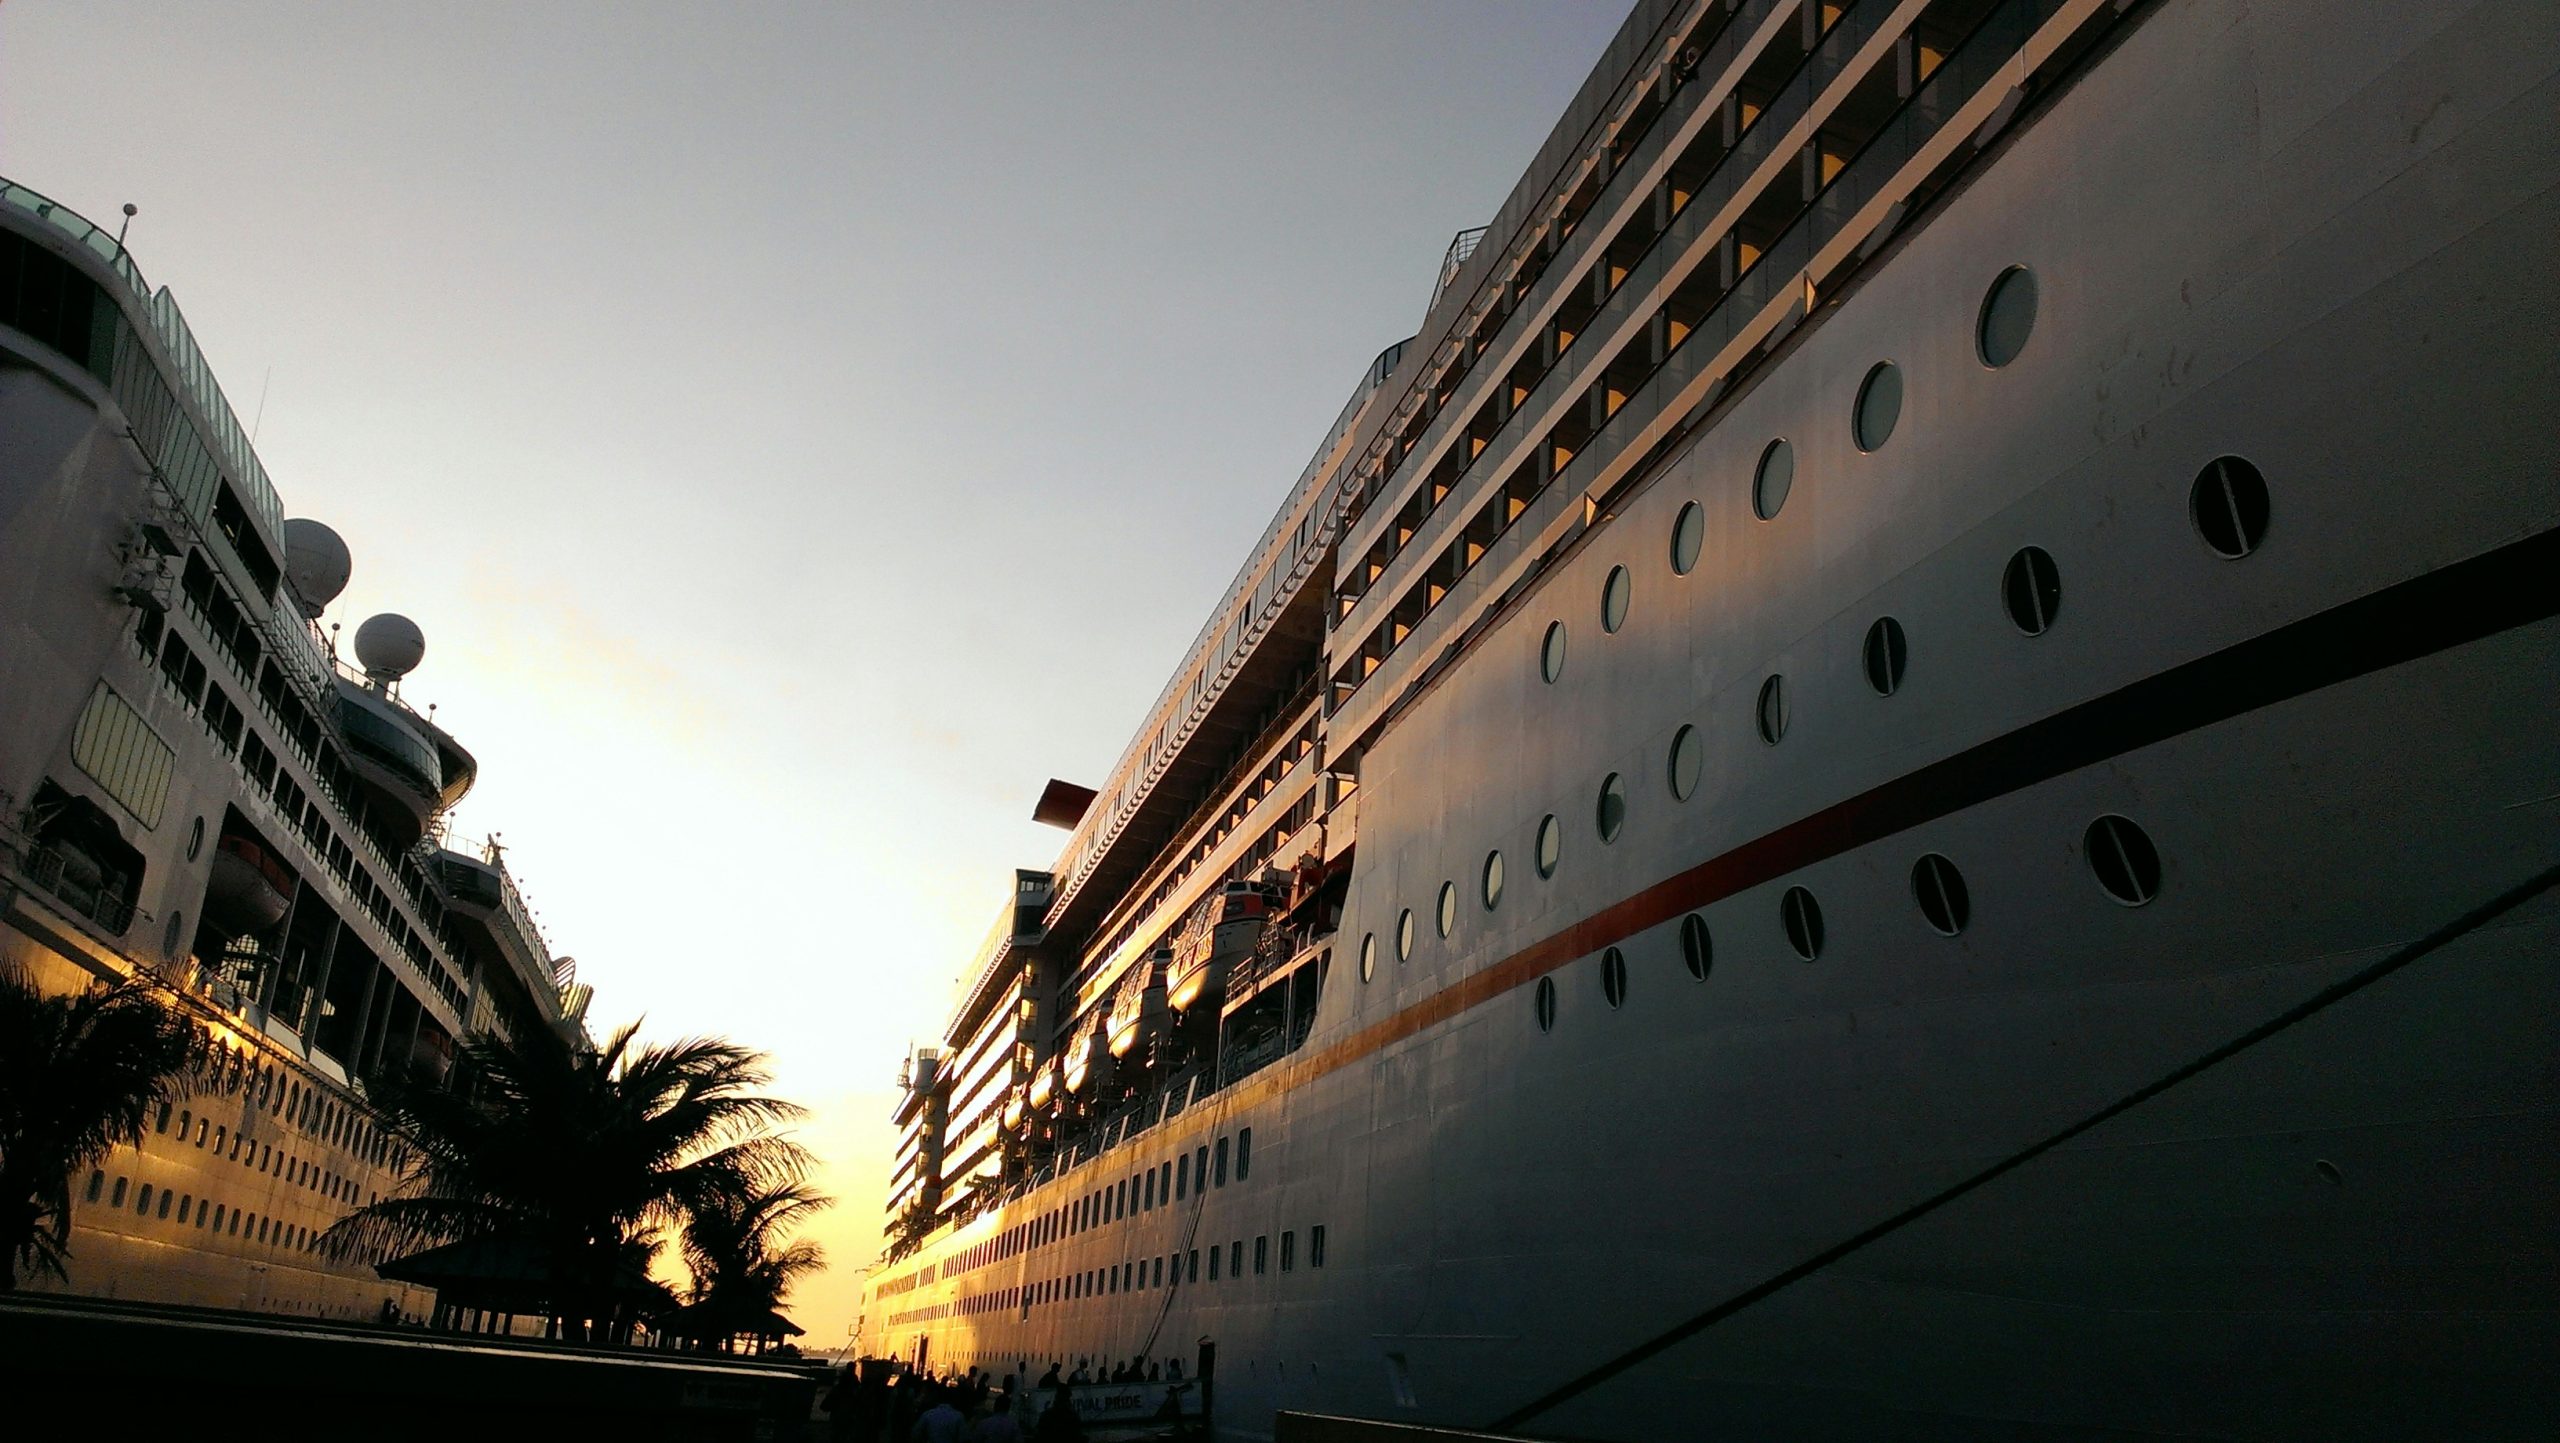 find the best cruise deals and discounts for your next vacation with our exclusive offers and packages.